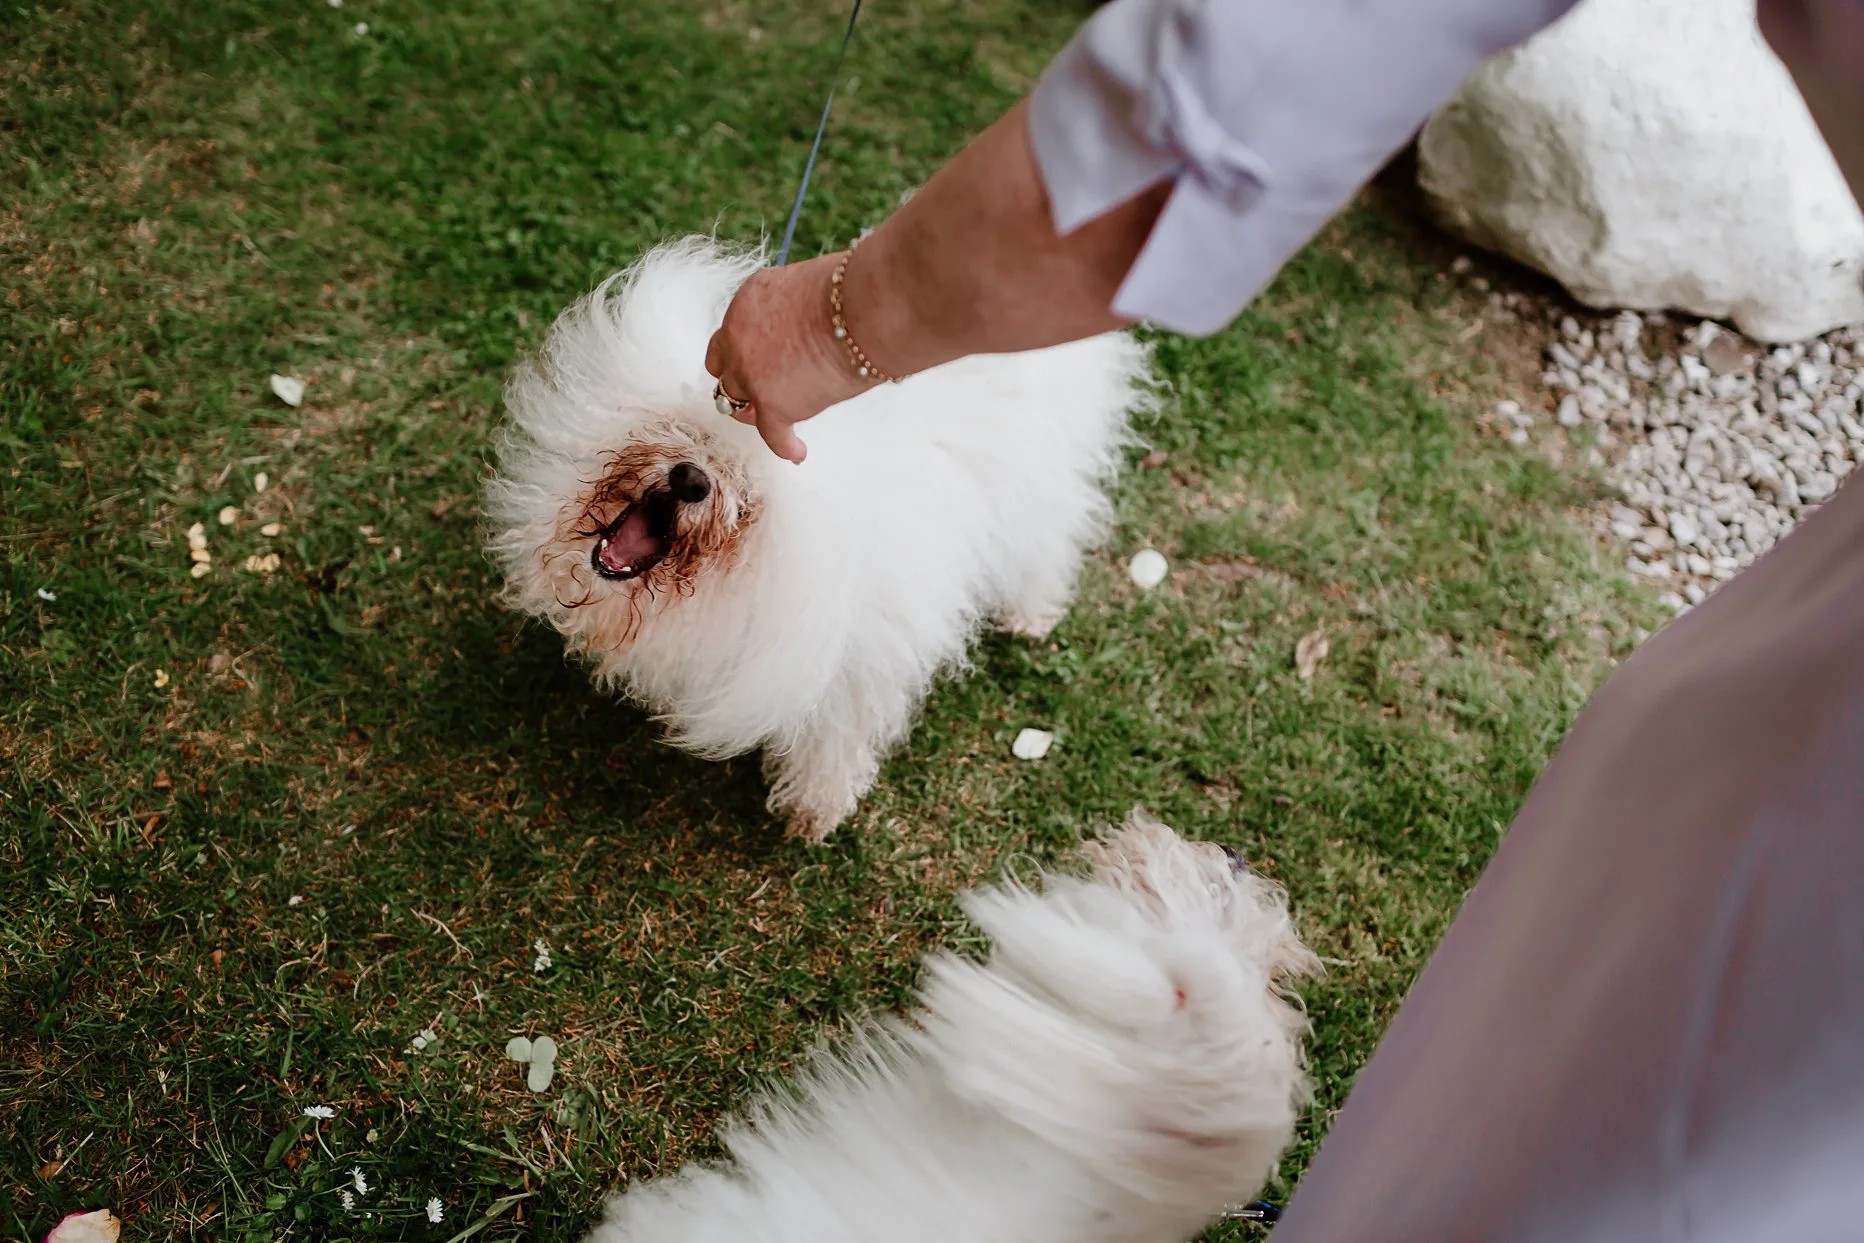 White fluffy dog looking up at camera as a wedding guests reaches down and feeds it a dog treat. New House Farm is a dog friendly wedding venue.